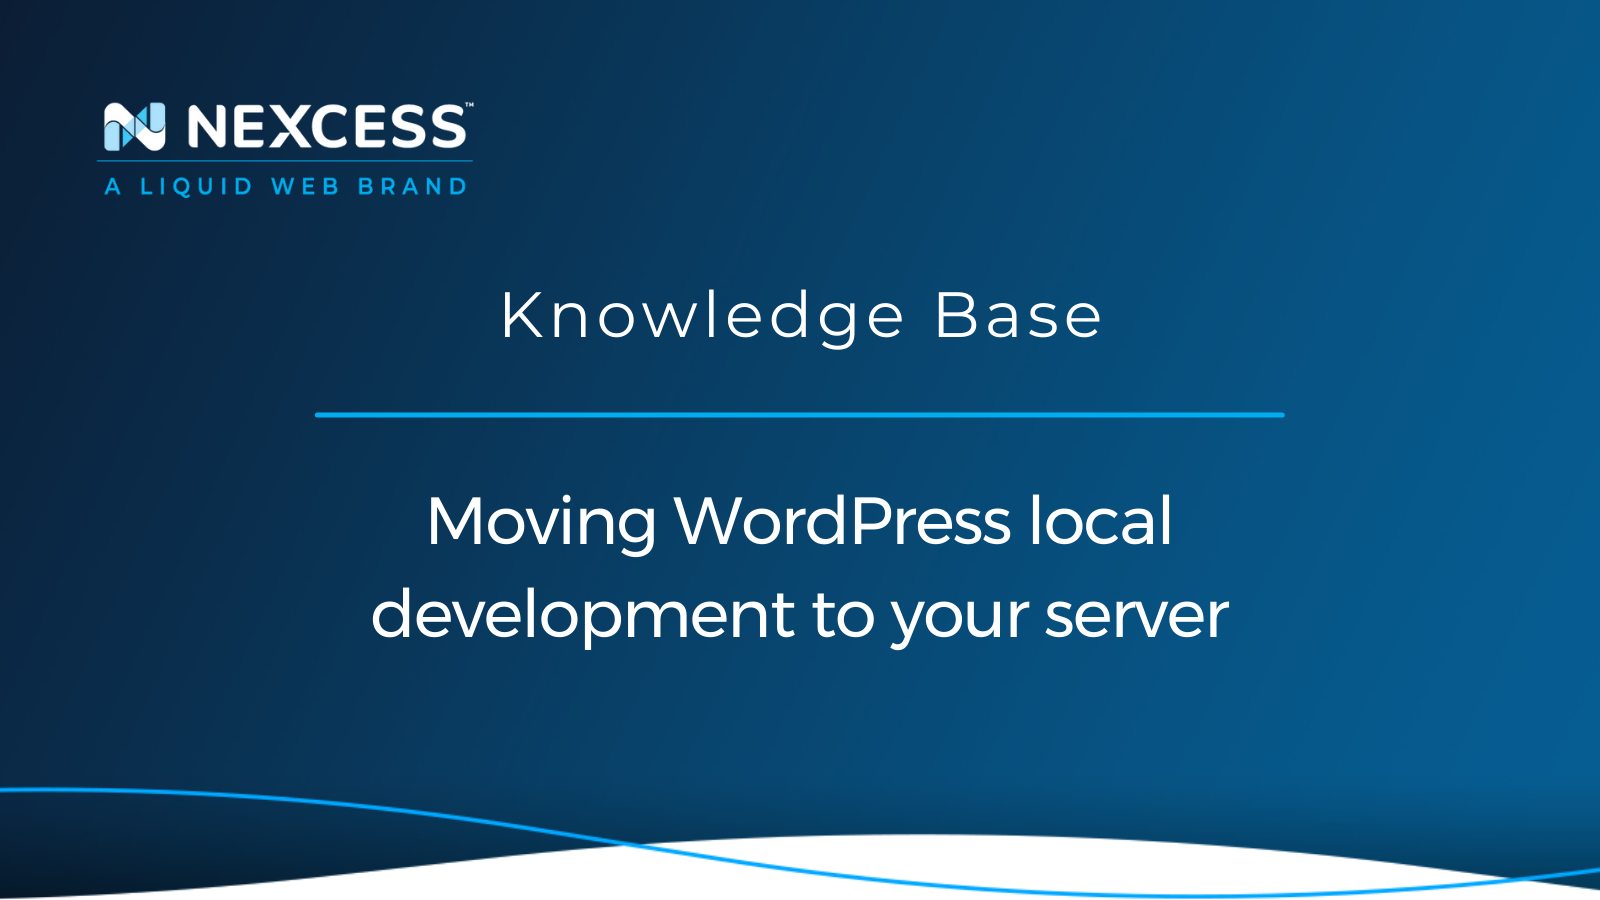 Moving WordPress local development to your server